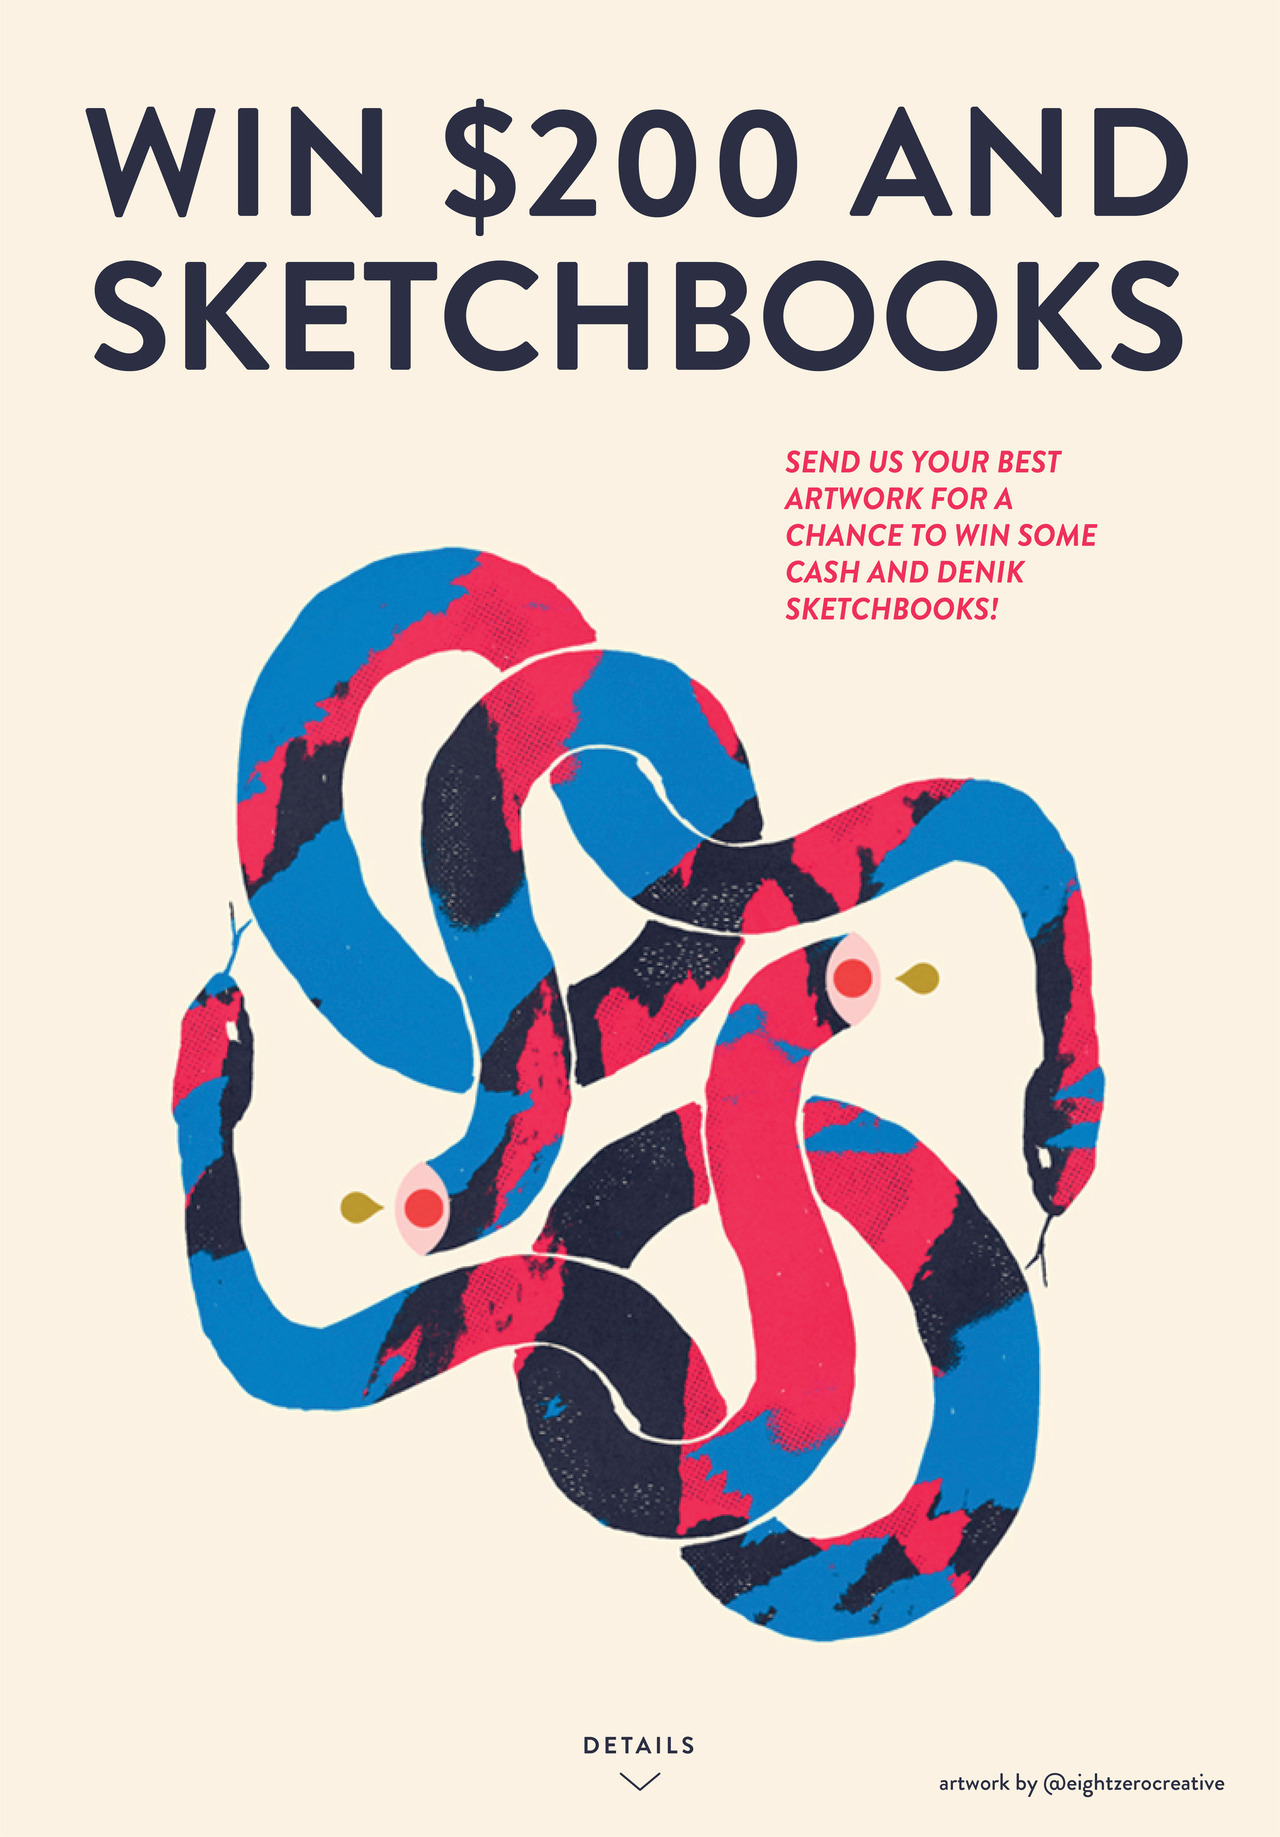 The EatSleepDraw team wants to see your best art submissions! 1st Prize: $200 cash, and $100 worth of Denik Sketchbooks/Notebooks of your choice. 2nd Prize: $75 Cash, and $50 worth of Denik Sketchbooks/Notebooks of your choice. Submit your art at...